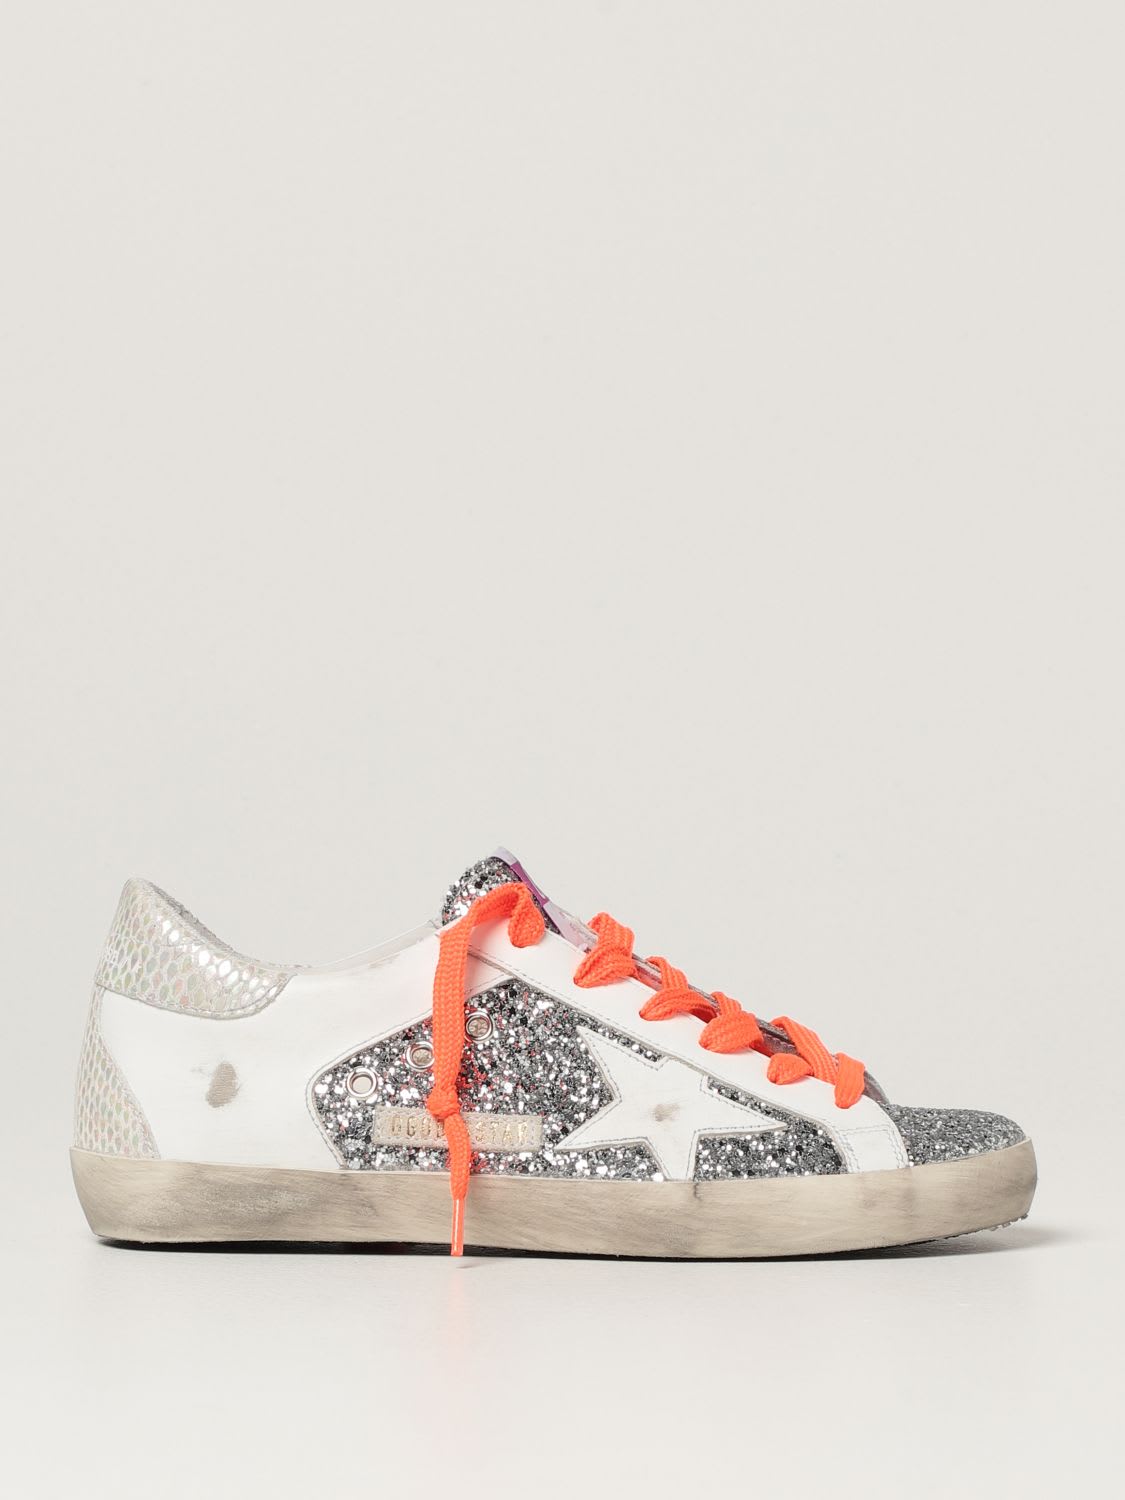 Buy Golden Goose Sneakers Superstar Golden Goose Glitter Sneakers online, shop Golden Goose shoes with free shipping